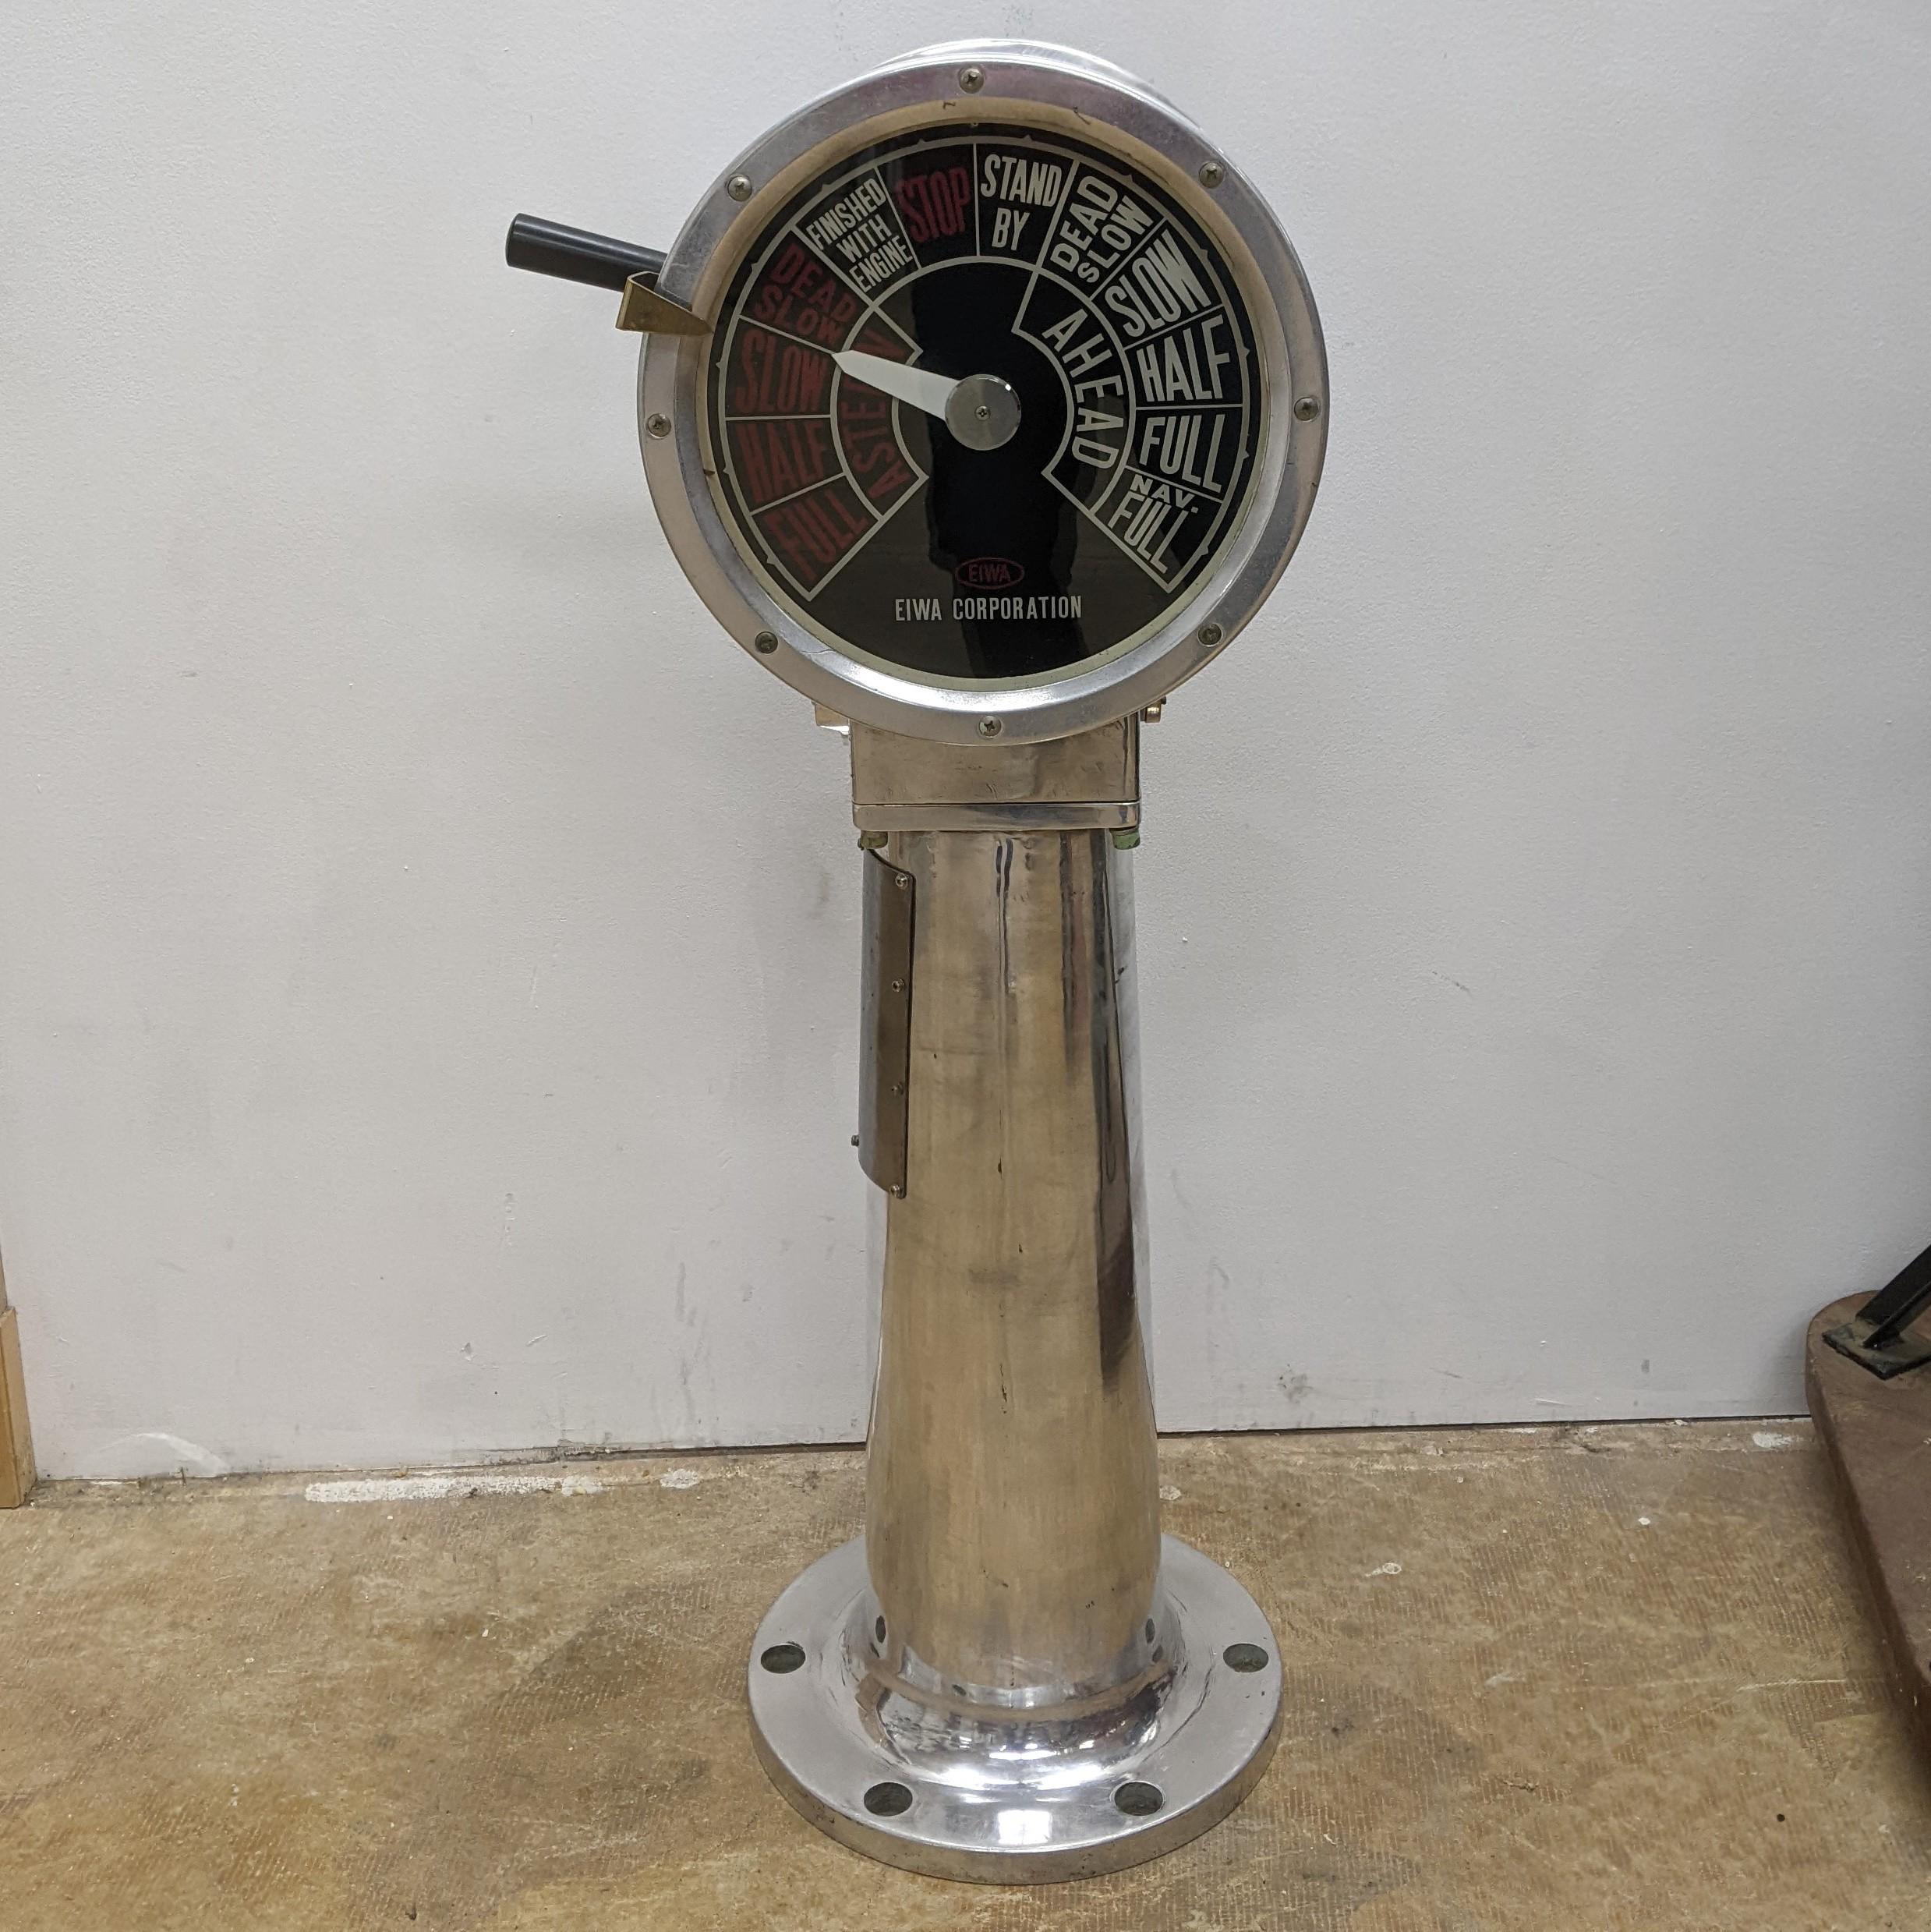 Experience the authenticity of maritime history with the EOT-19 Salvaged Aluminum EIWA Engine Order Telegraph. This rare and original piece was once used to transmit orders from the captain to the engine room on ships. Its rugged aluminum